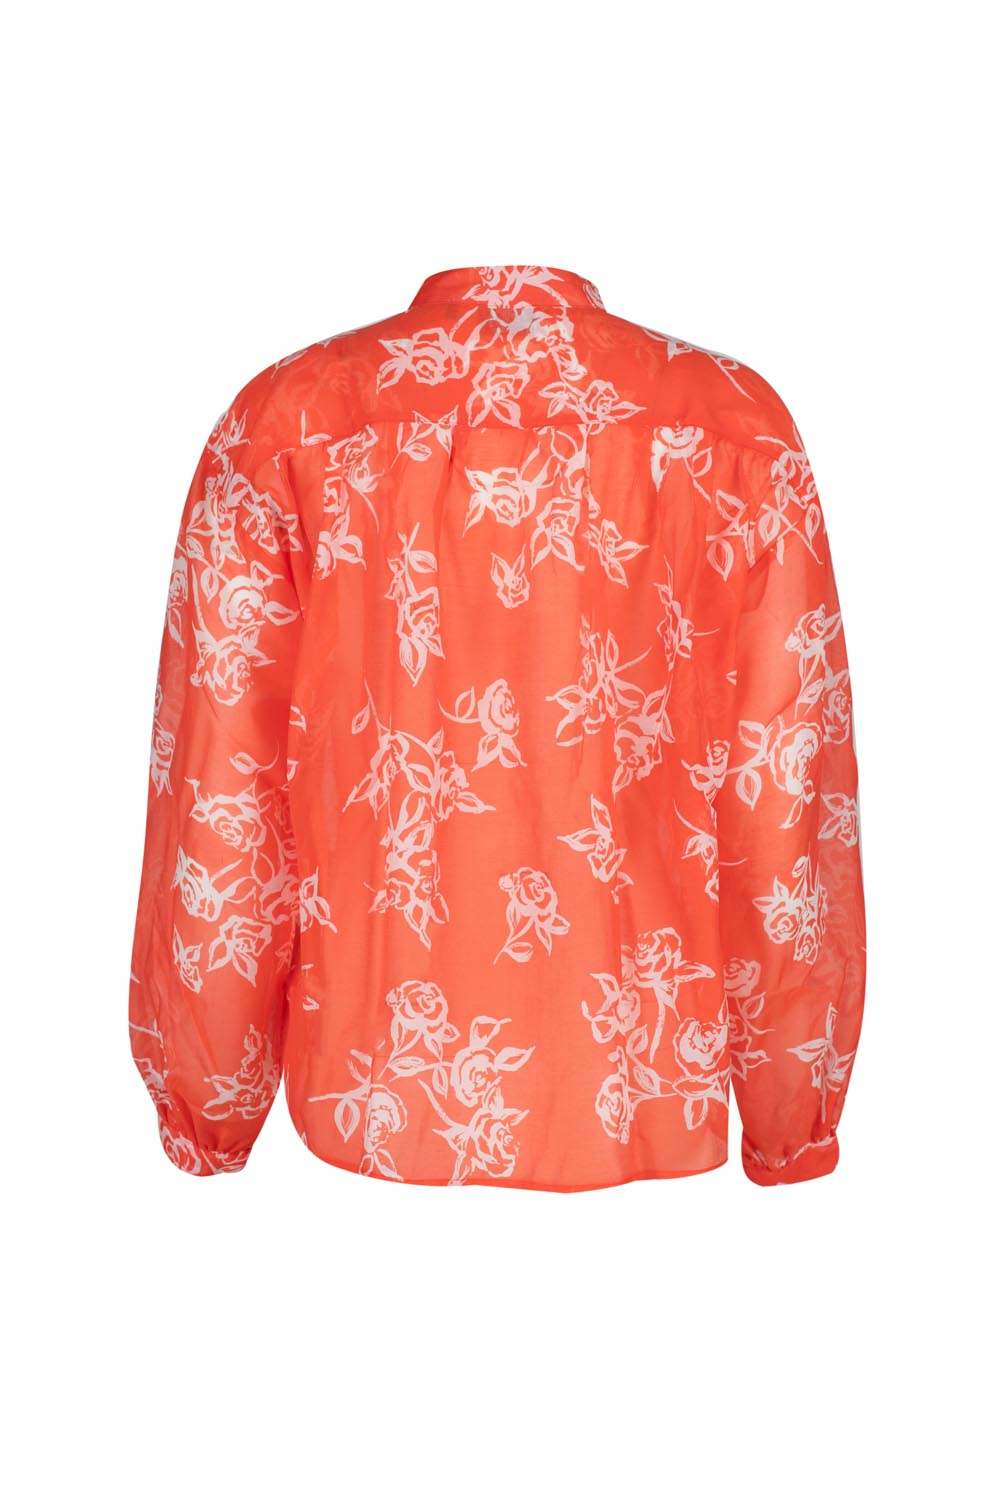 Oversized Grandpa Sheer Floral Shirtblouse with Puffed Sleeves